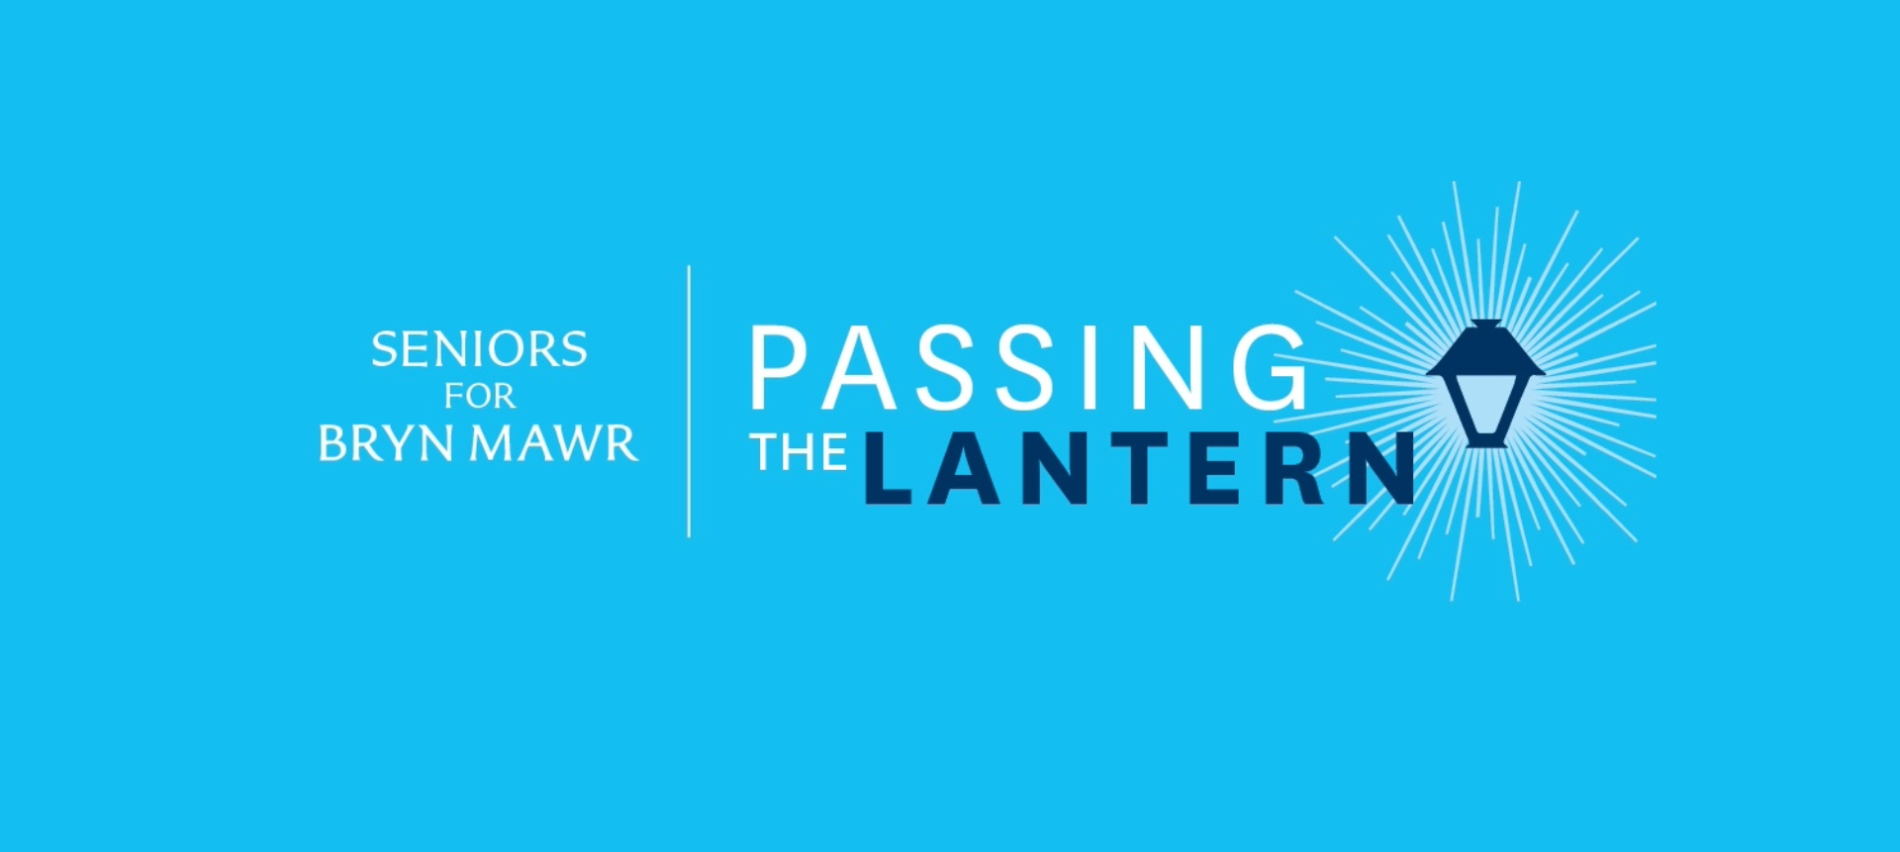 Seniors for Bryn Mawr: Passing the Lantern on a light blue background.